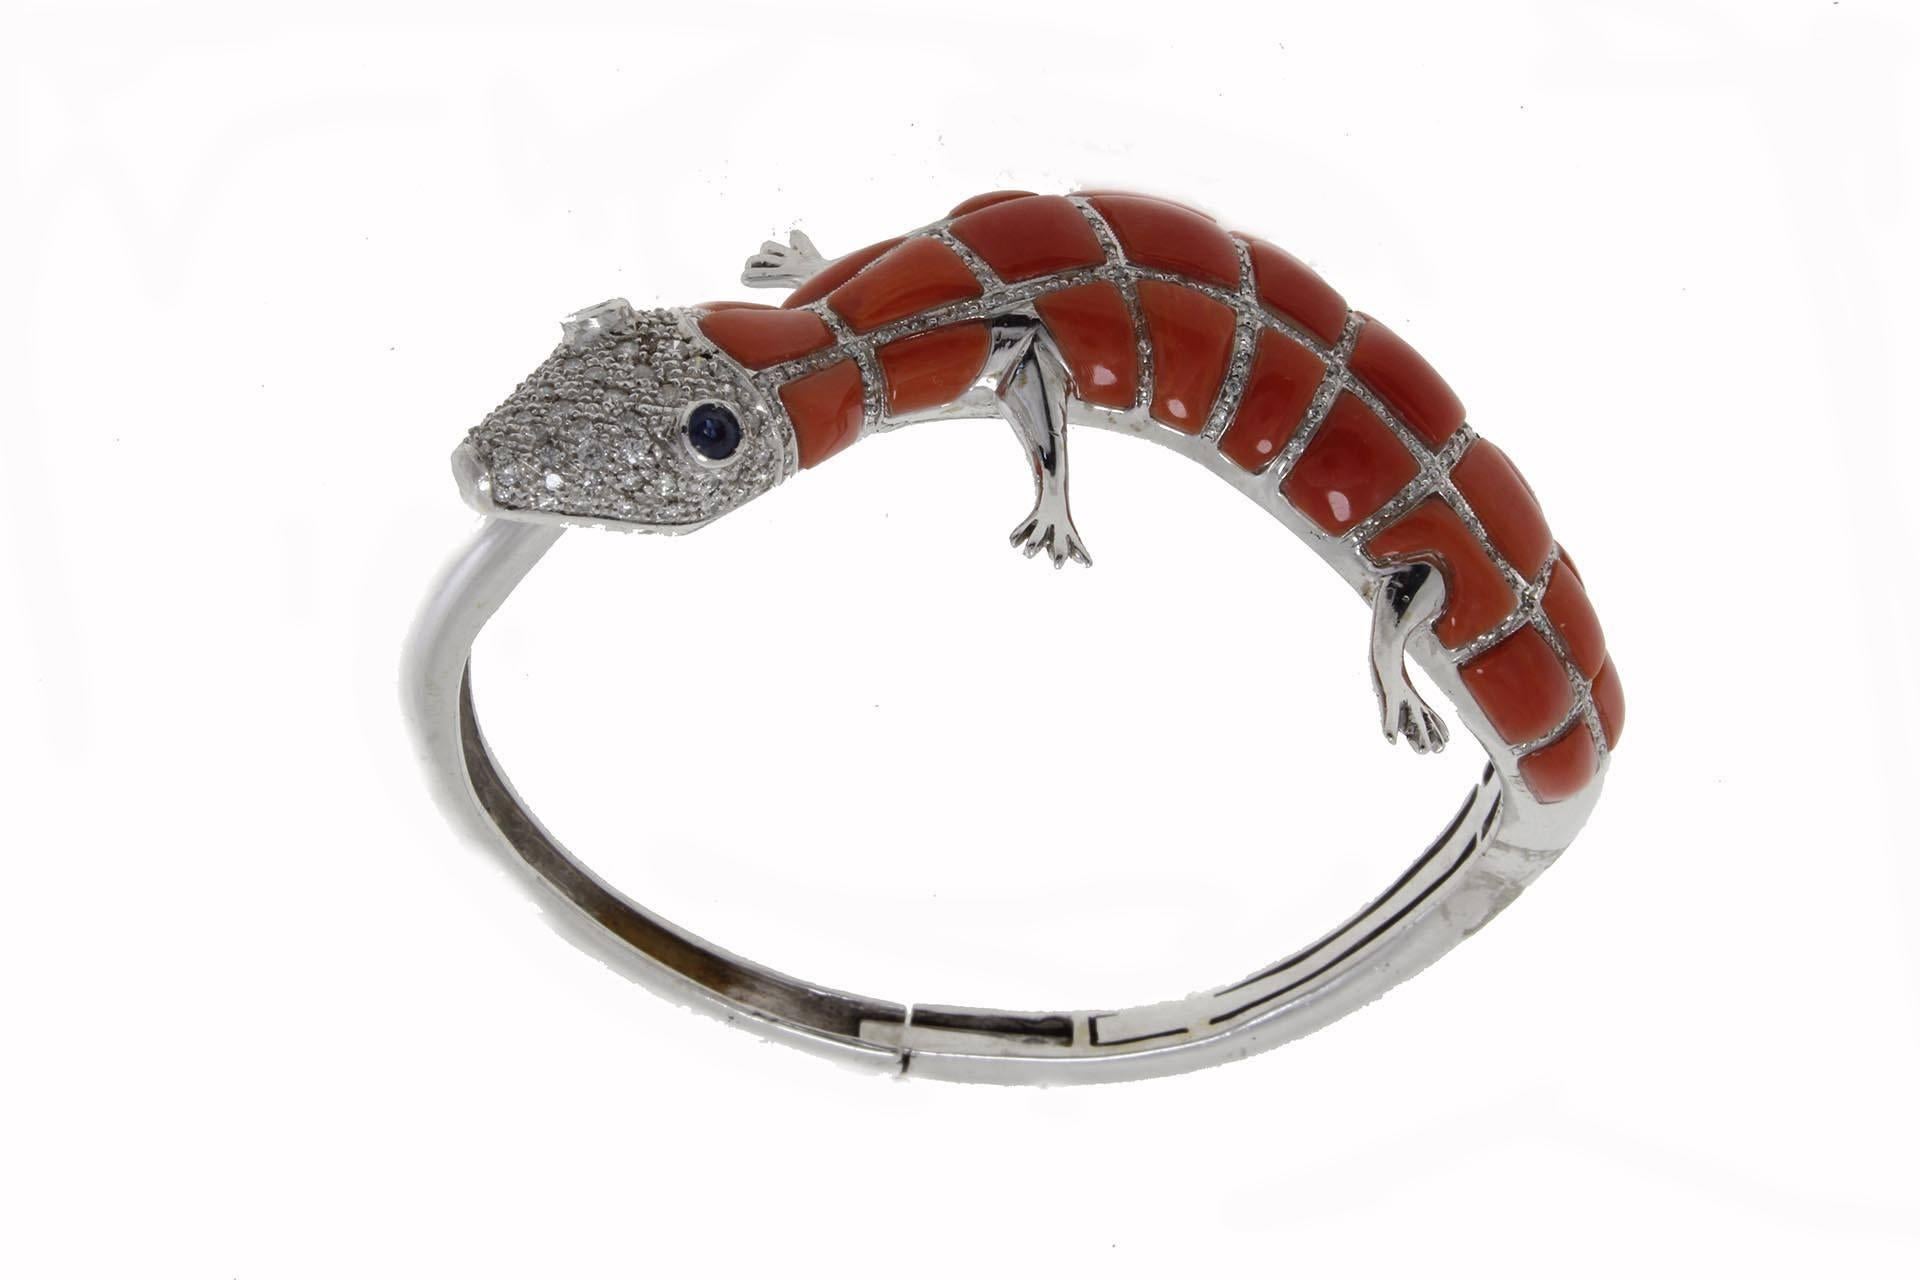 Lizard shaped bracelet in 14Kt white gold adorned with a coral and diamond body and blue sapphires eyes.

diamonds(1.35Kt), 
coral (4.6gr)
blue sapphires (0.31Kt).
Tot weight 41.9gr
Rf. iuru